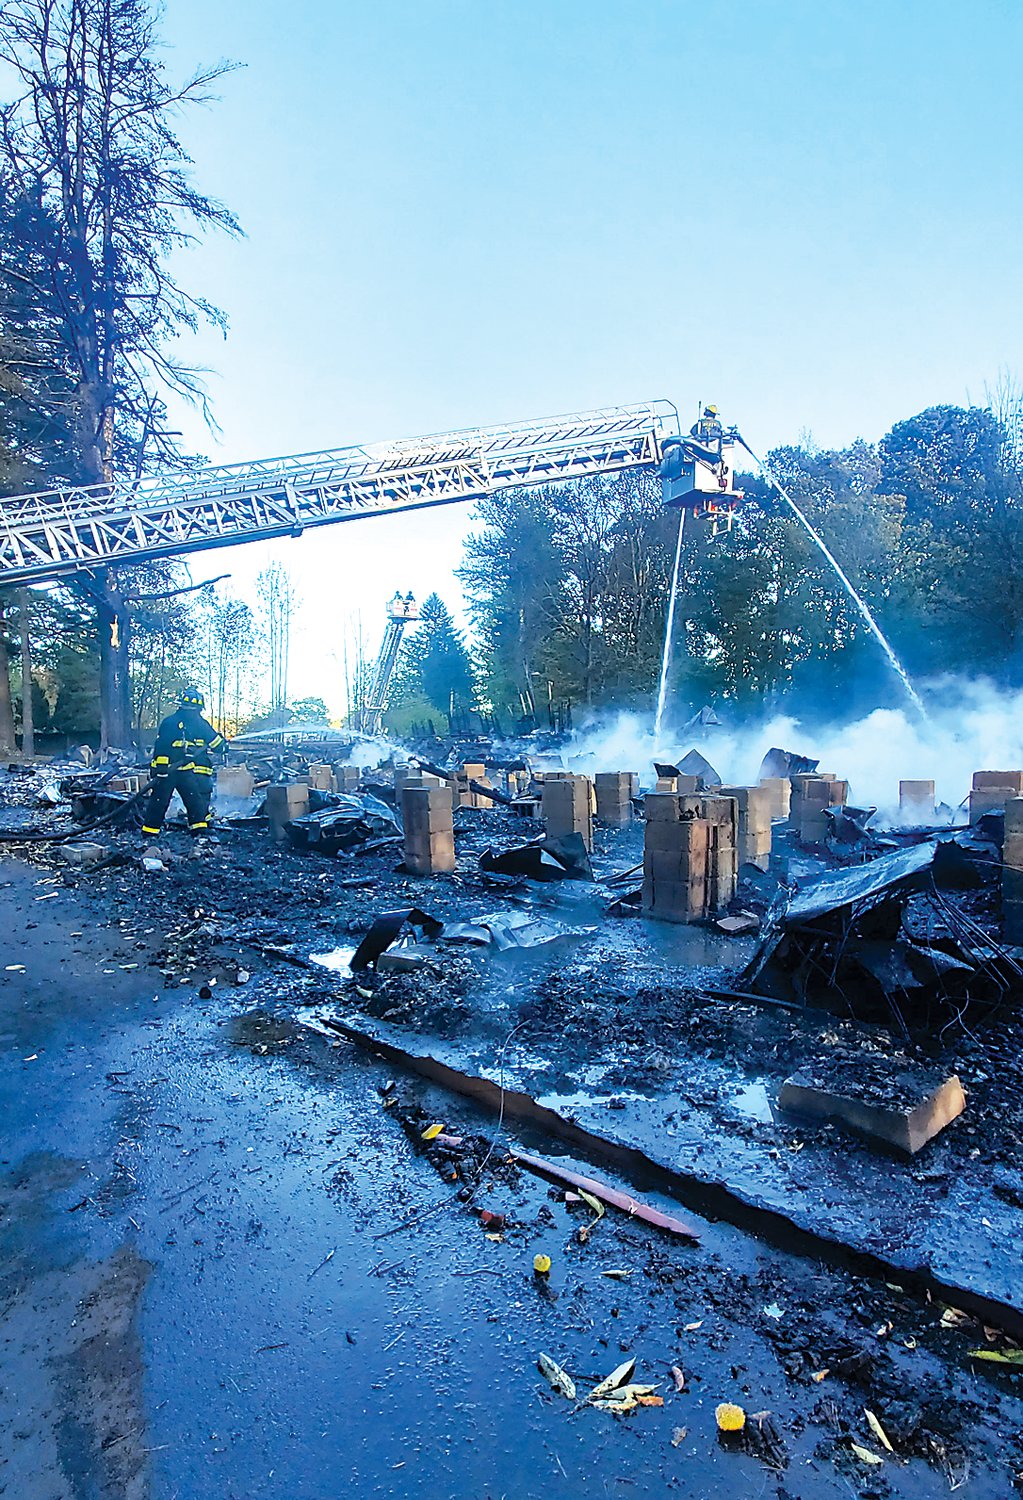 Monticello Fire Dept. arrived at a fully involved working fire at Camp Adas on Sackett Lake Road on Friday.